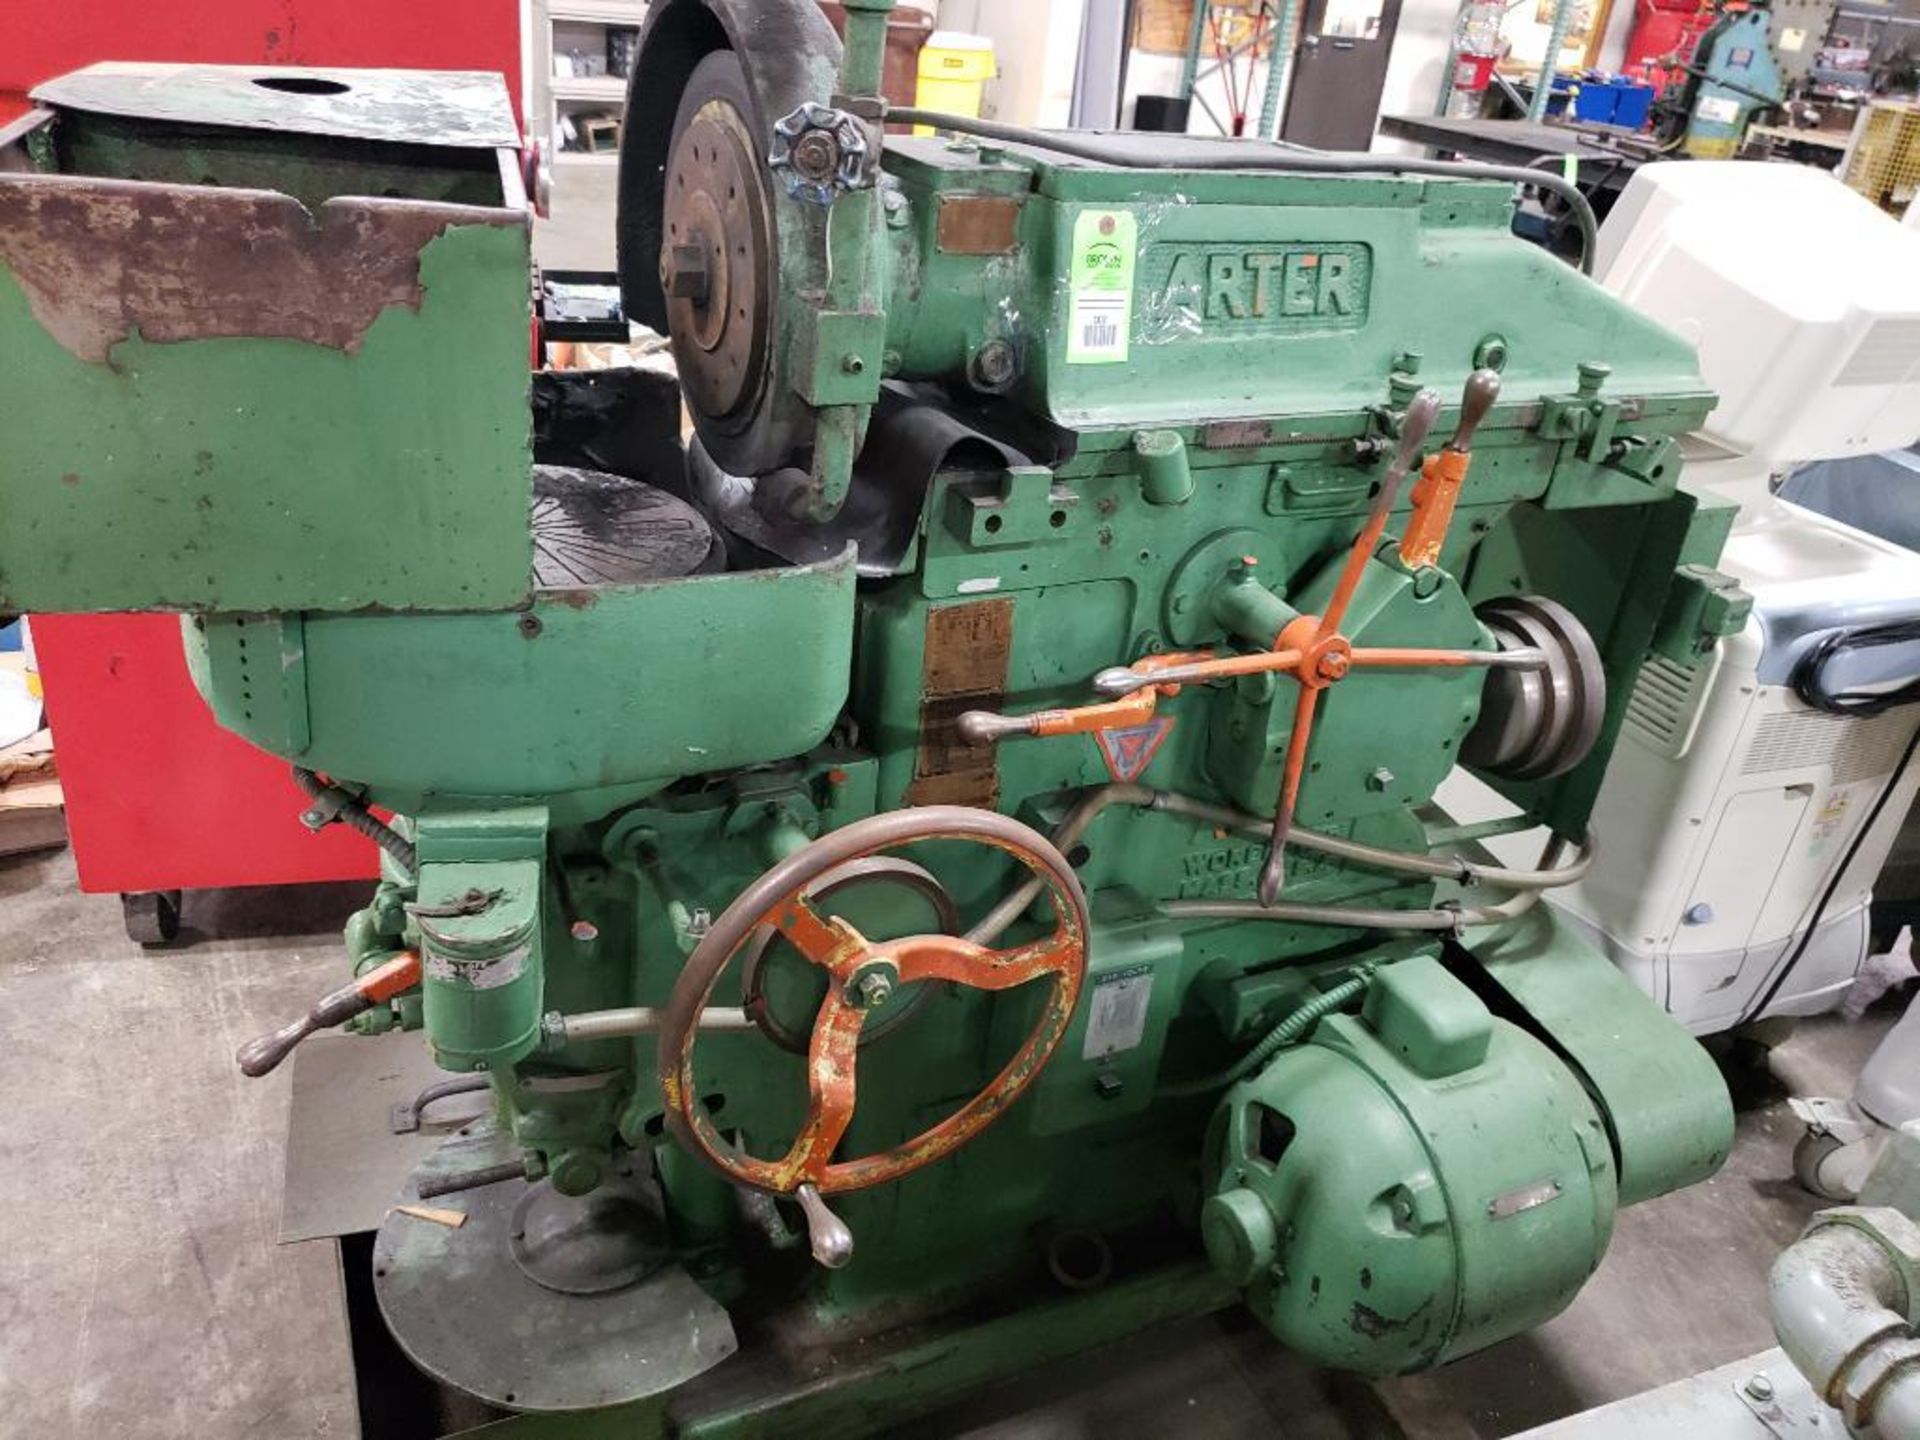 Arter Winding Machine Company A-1-8 horizontal spindle rotary surface grinder, 230V Magnetic Chuck.